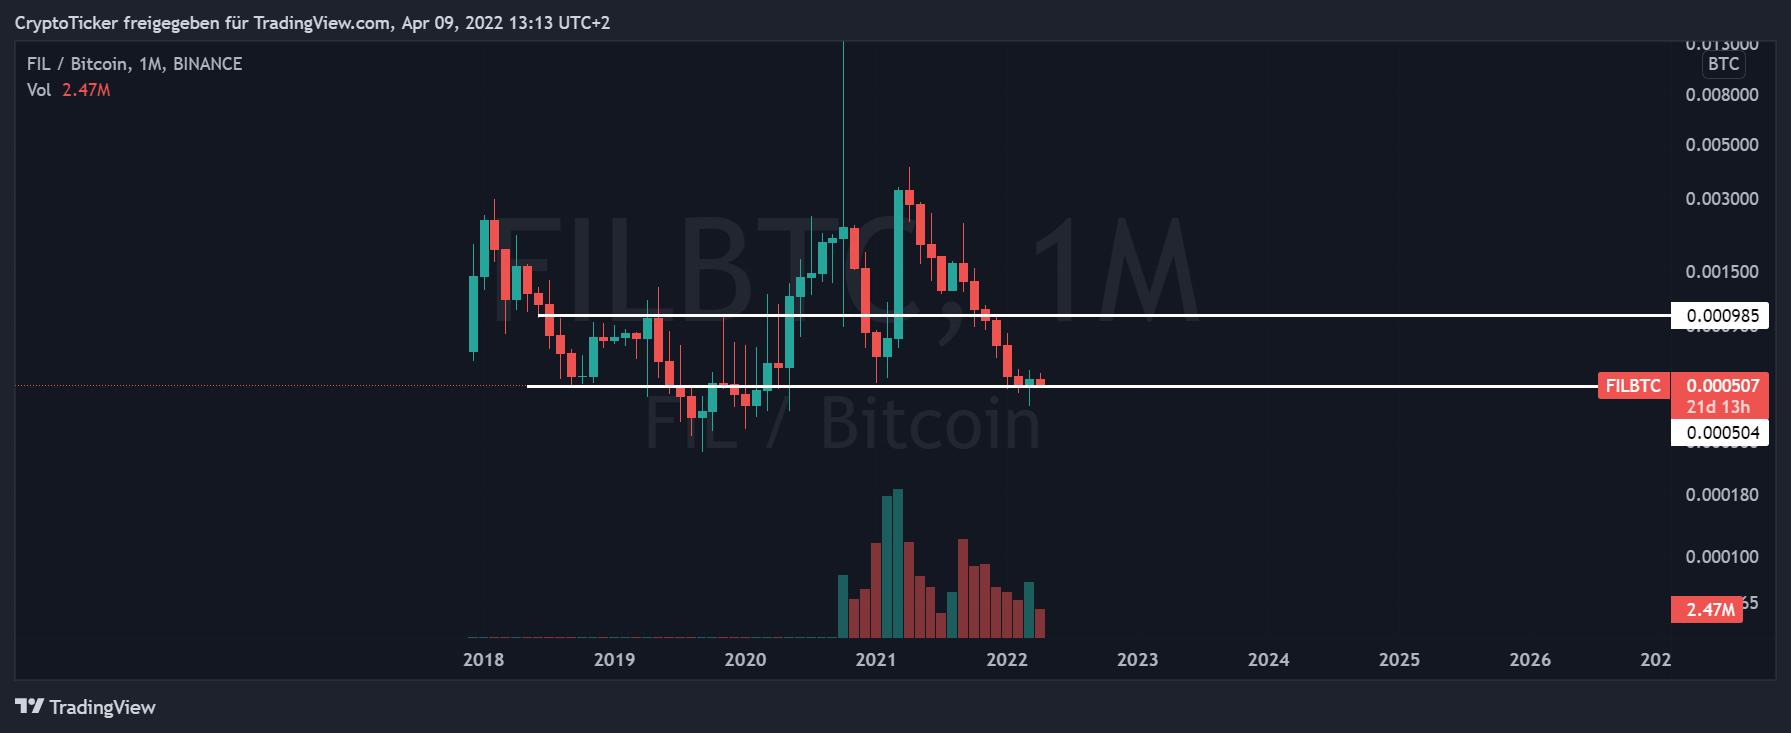 FIL/BTC 1-month chart showing how Bitcoin outperformed Filecoin